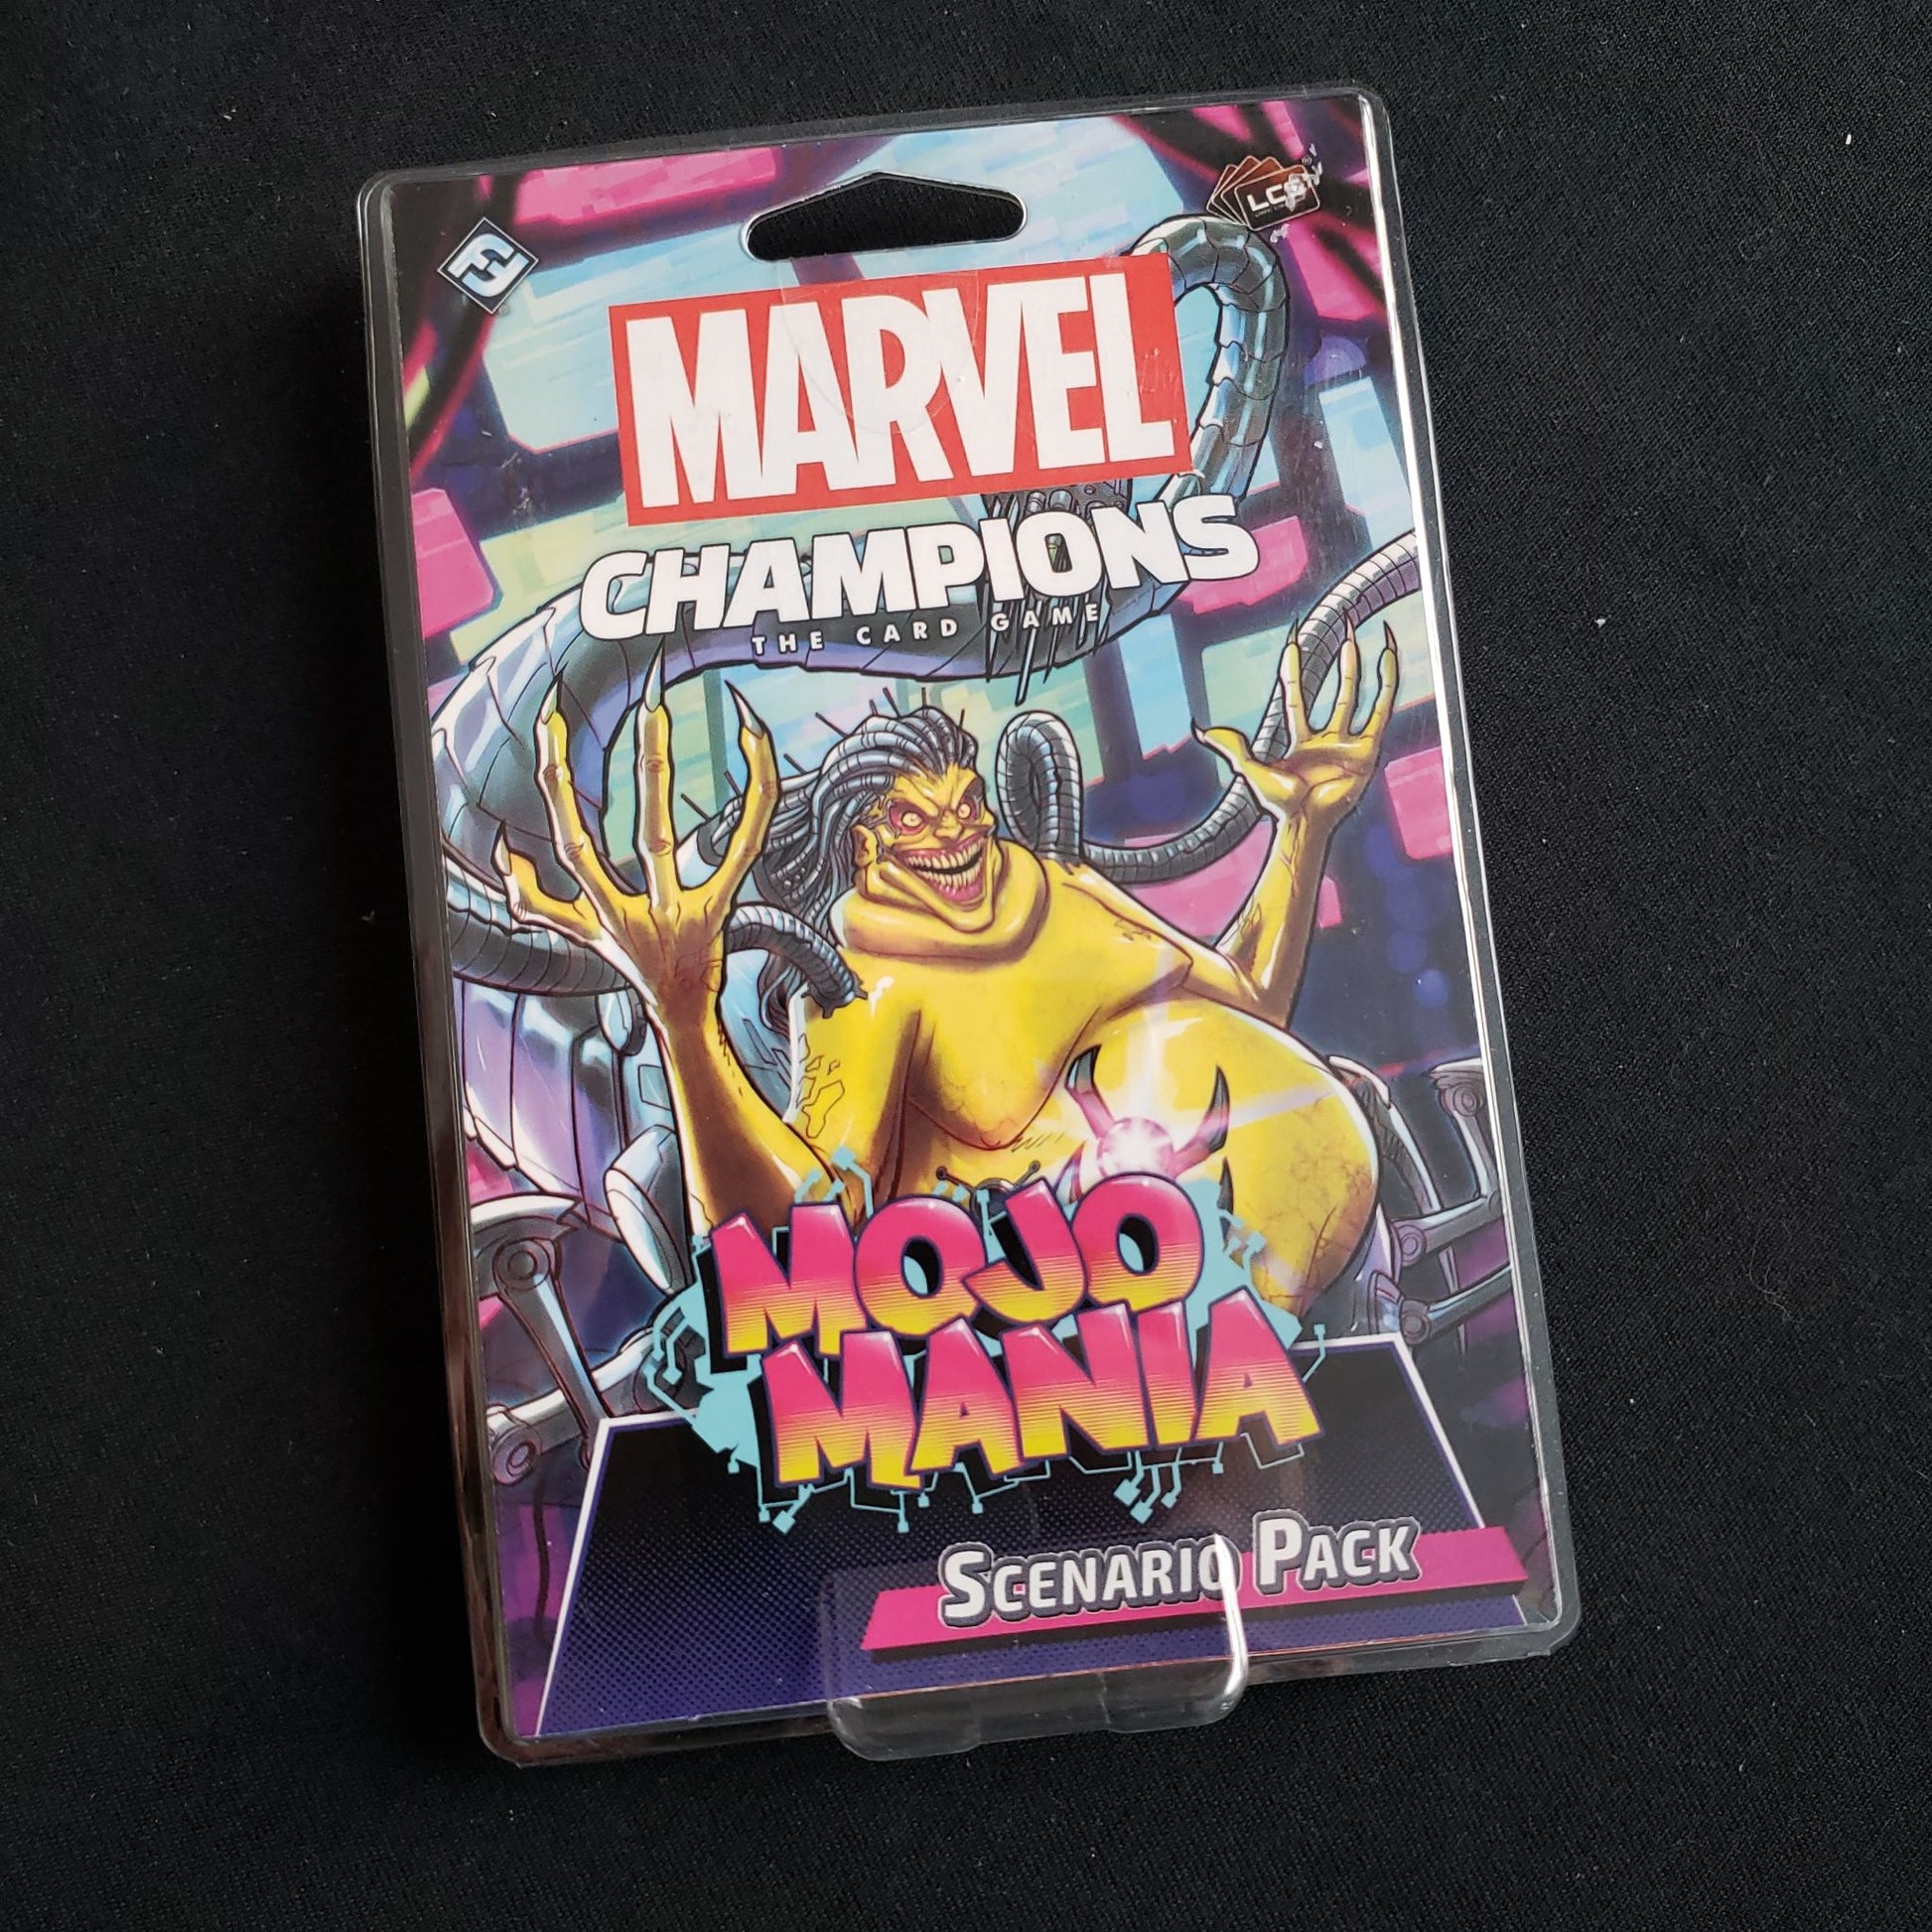 Image shows the front of the package for the MojoMania Scenario Pack for the Marvel Champions card game